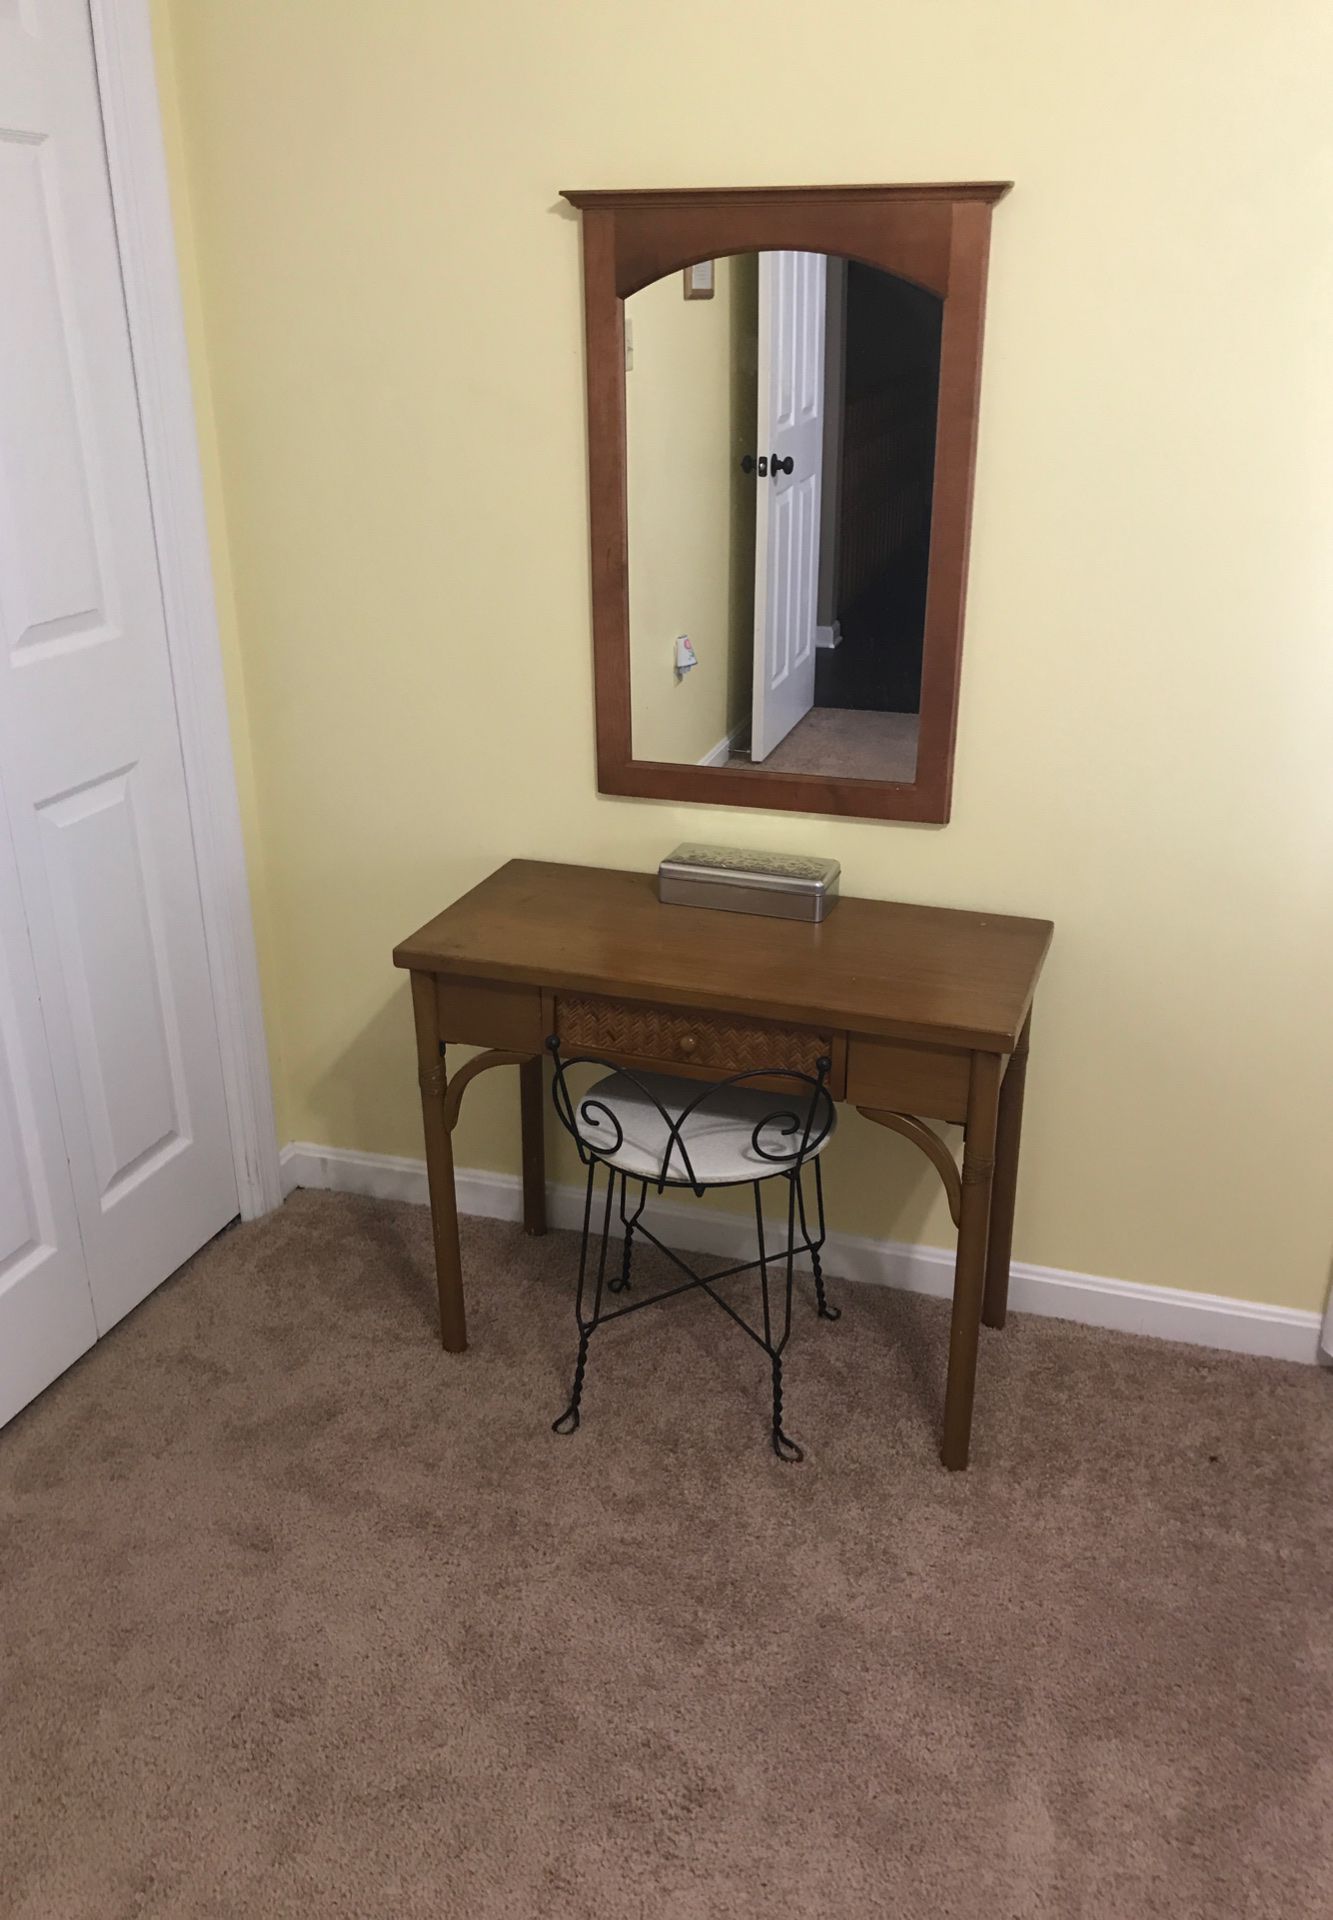 Make up table and mirror